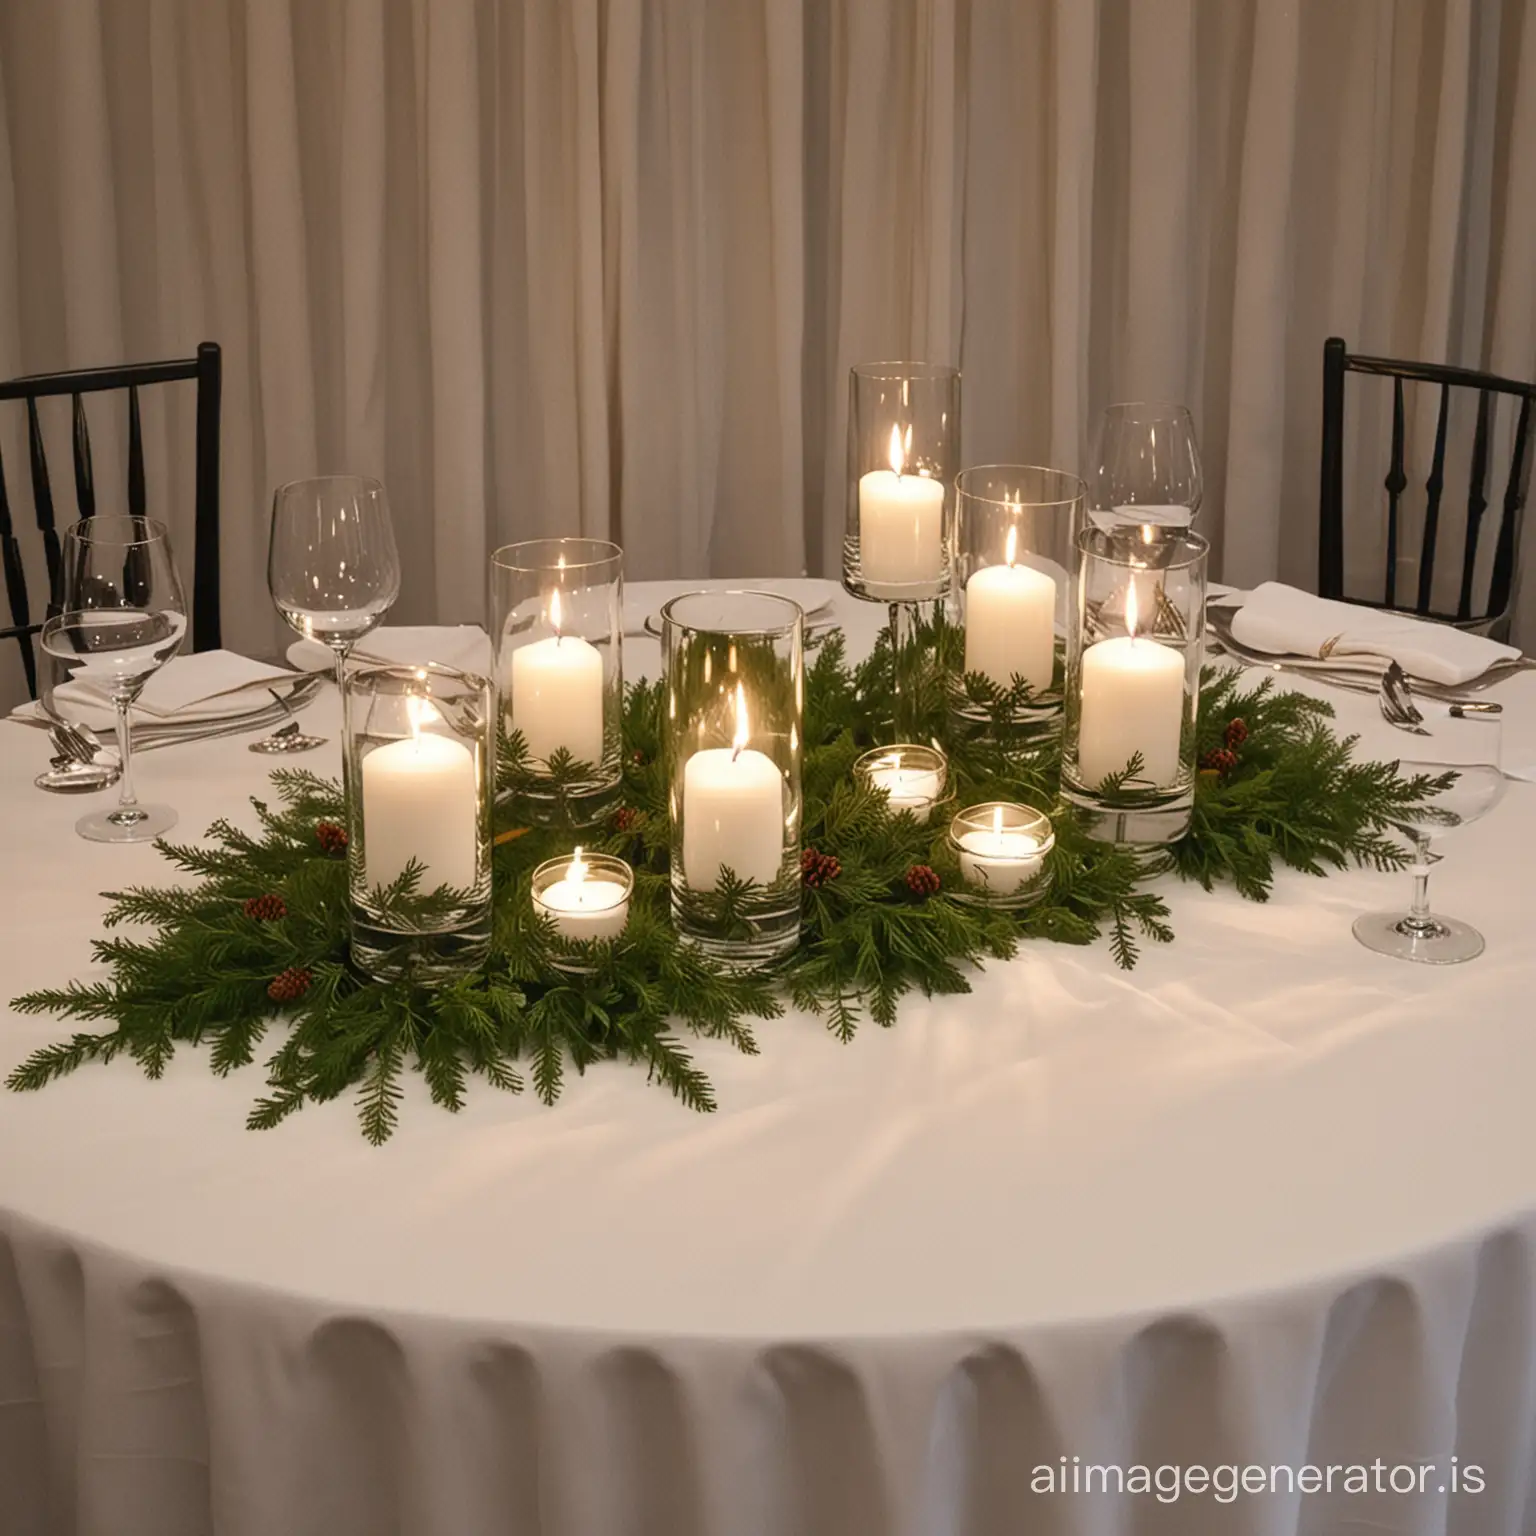 show a table with a white tablecloth set for a wedding with a centerpiece of 3 wine glasses that are different heights, each filled with water and a floating lit candle and an evergreen ring around the base of the centerpiece